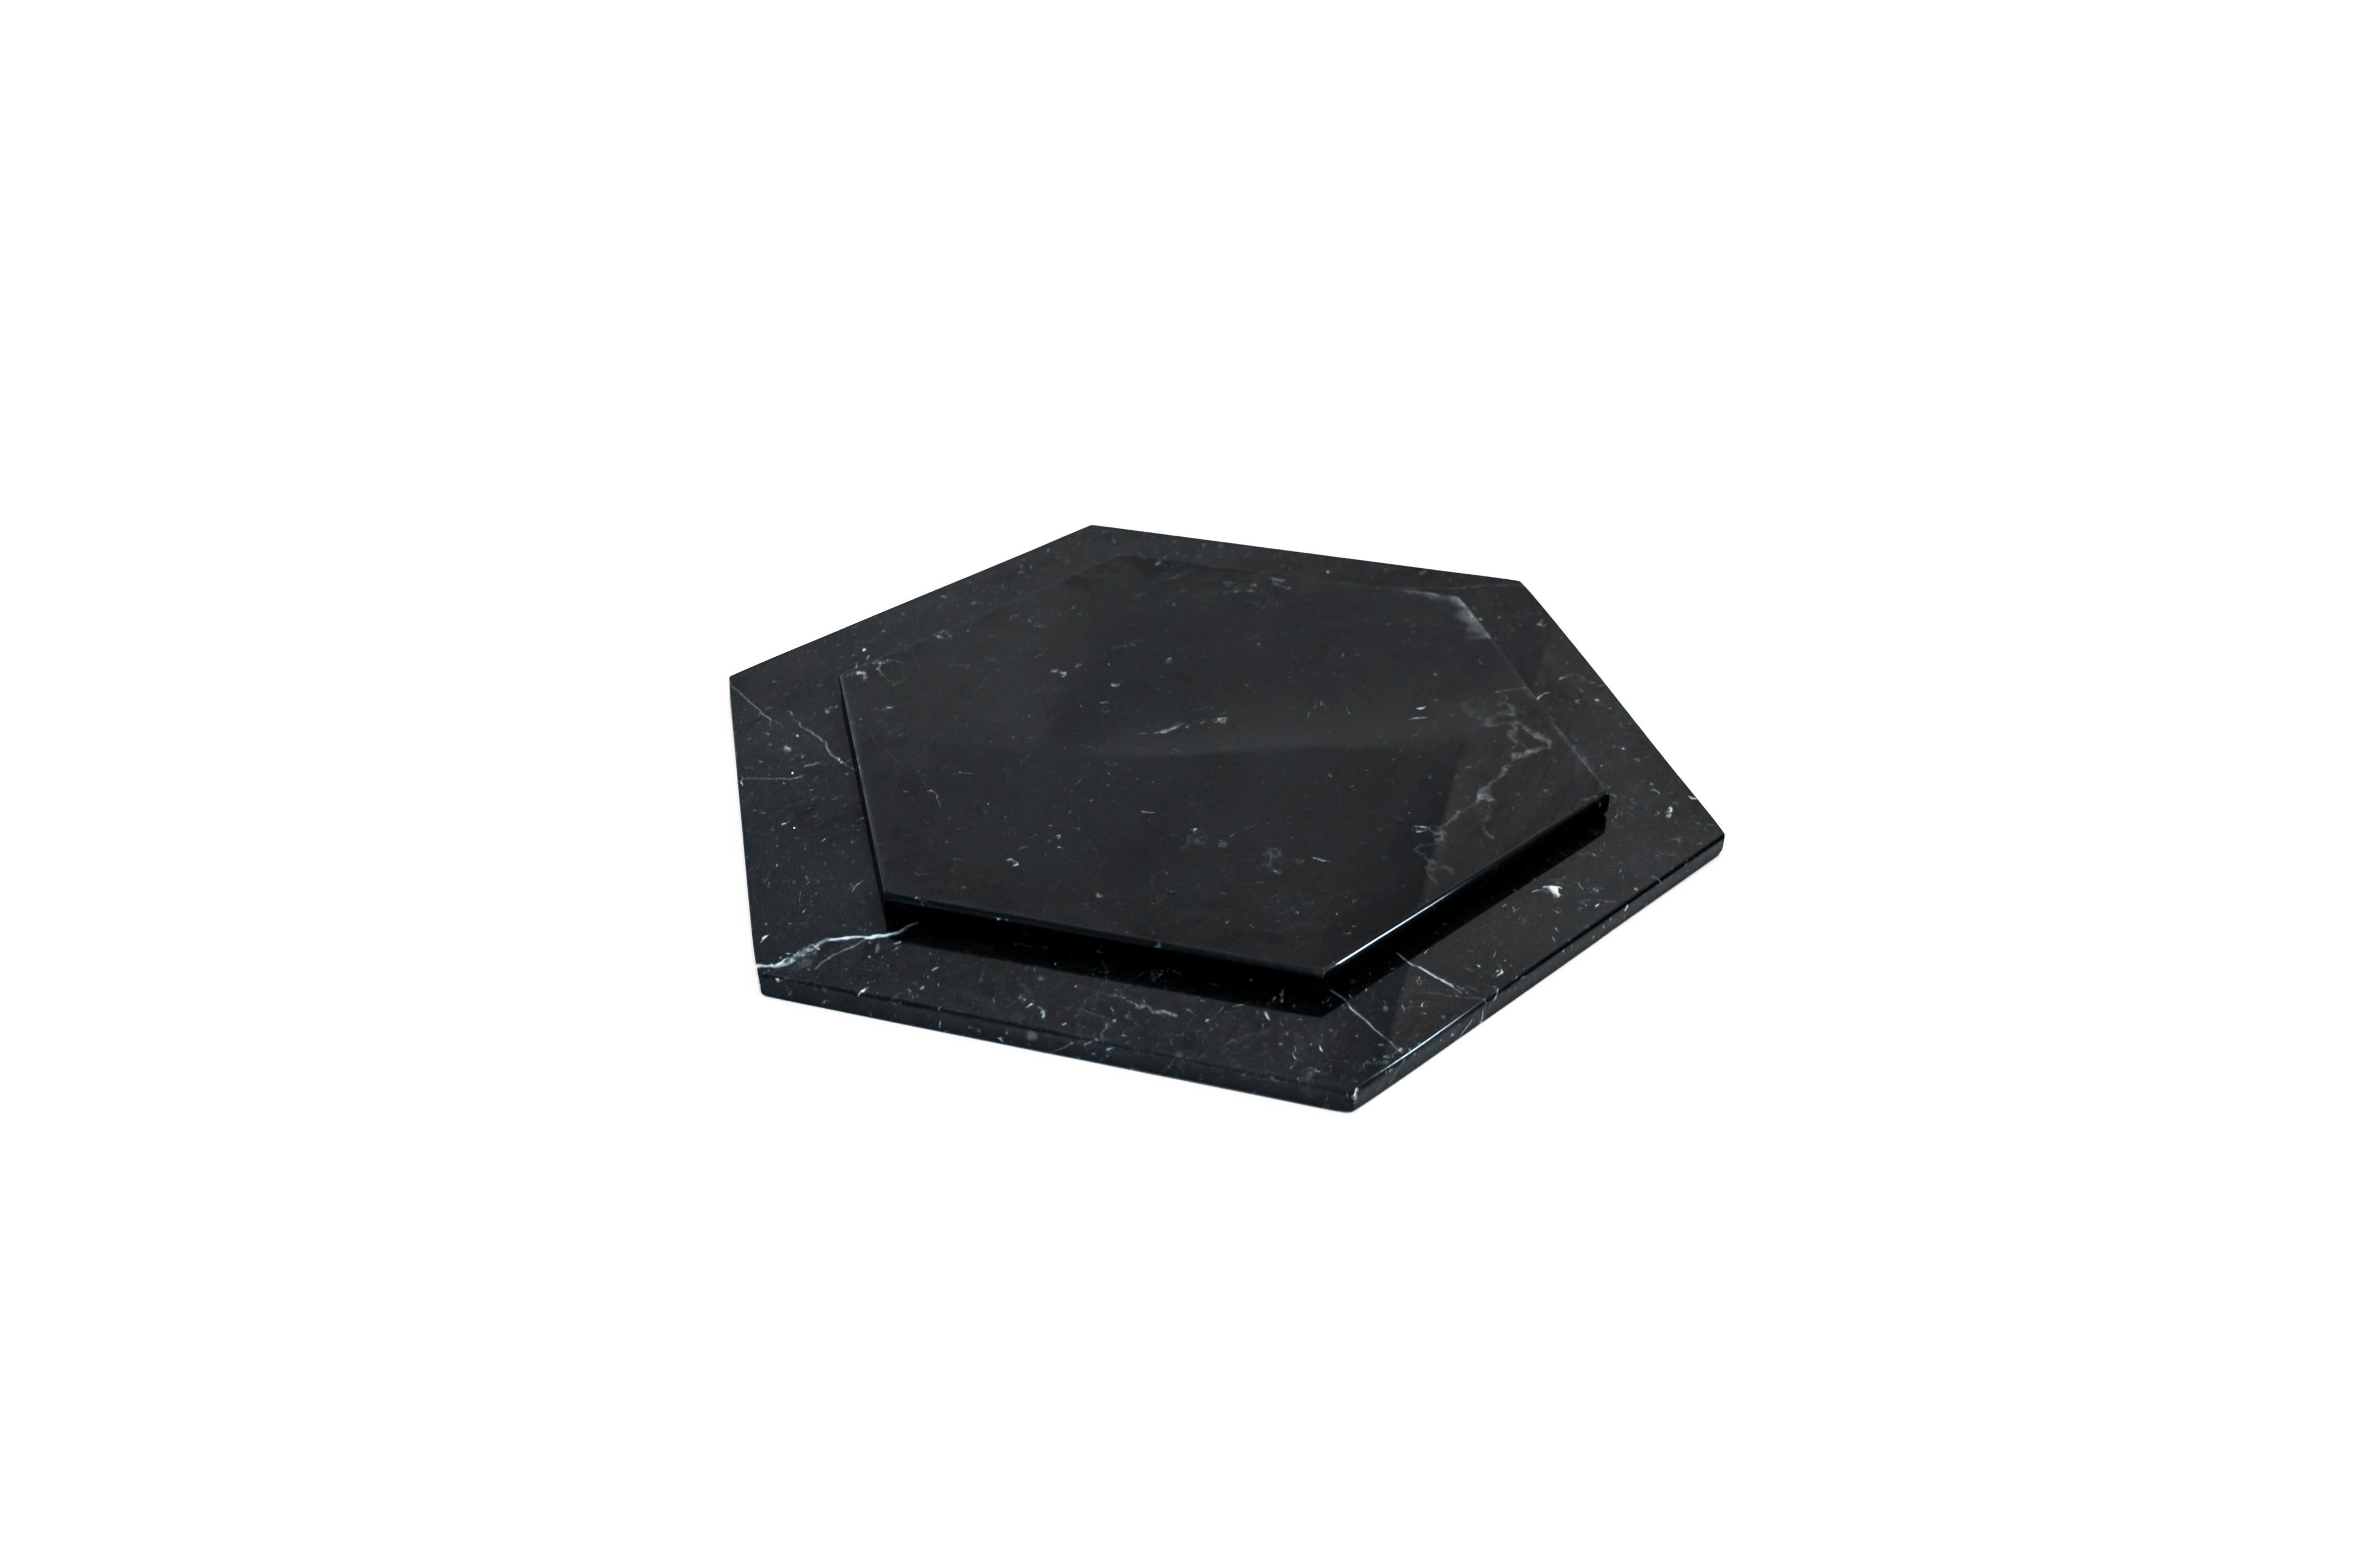 Set of 2 hexagonal black Marquina marble plates / serving dishes. 
Big plate diameter 40 cm, small plate diameter 30 cm.
Each piece is in a way unique (every marble block is different in veins and shades) and handmade by Italian artisans specialized